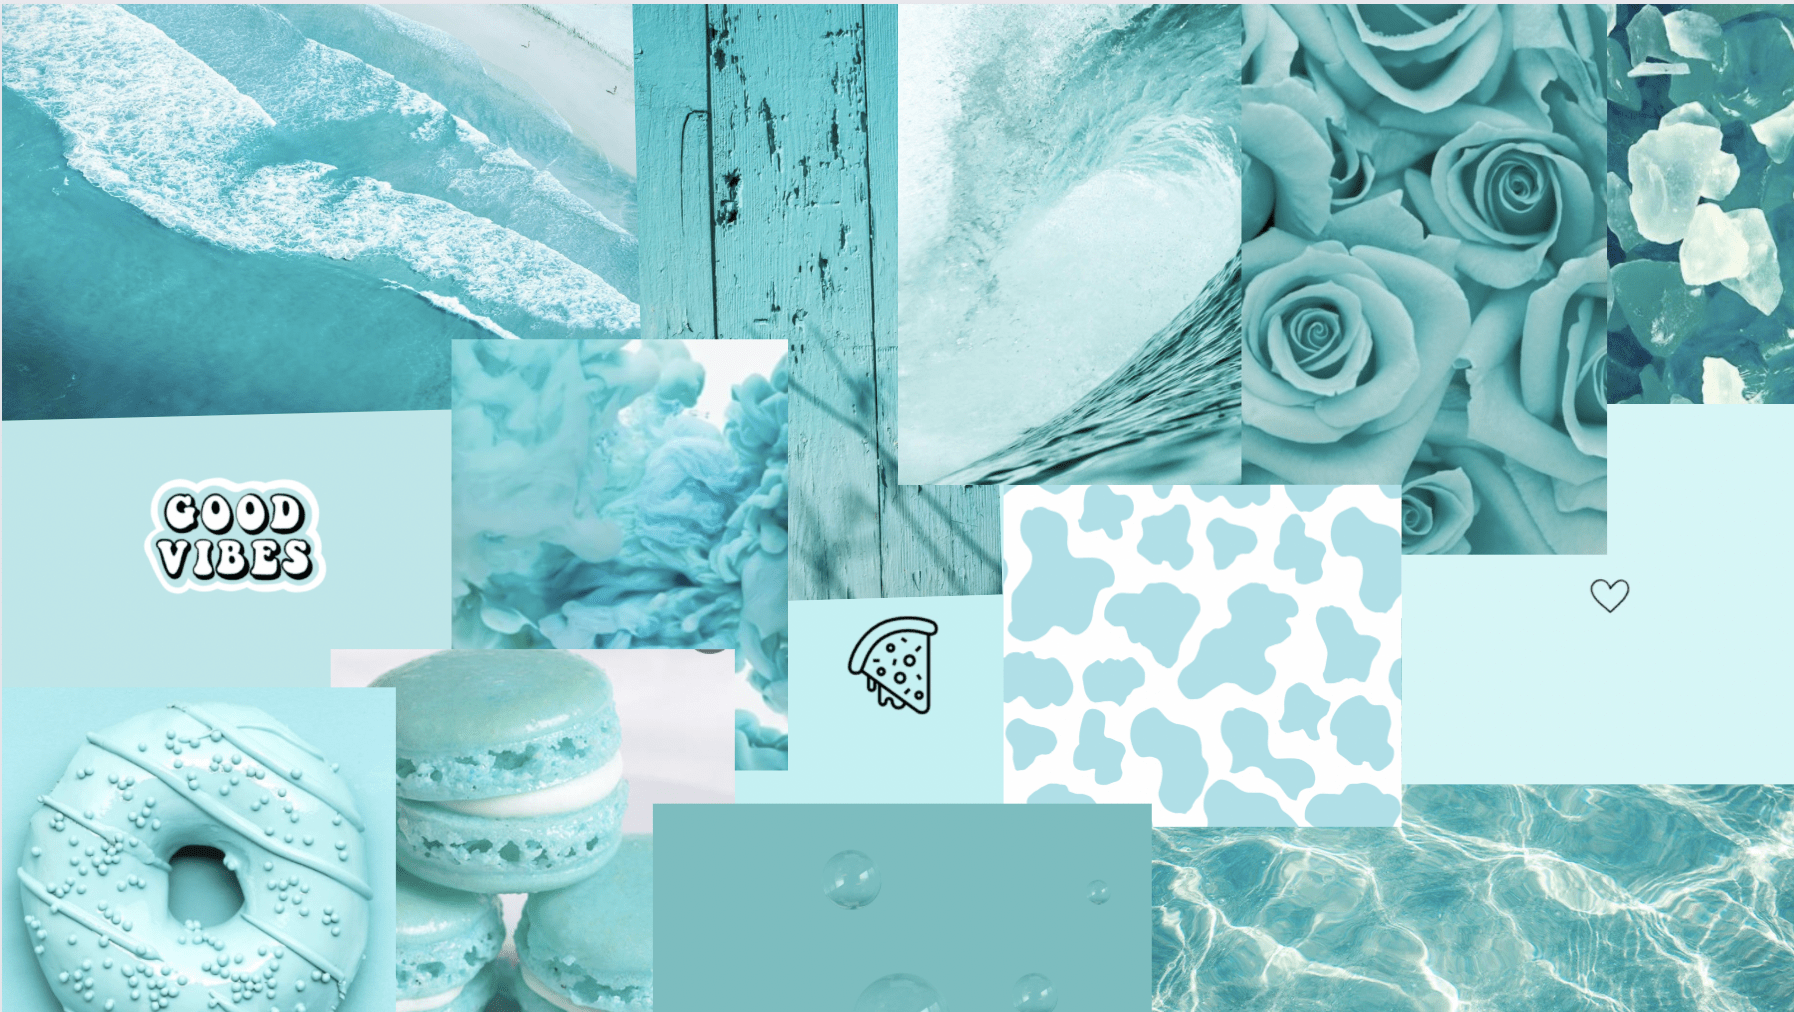 A collage of blue aesthetic pictures including flowers, water, and donuts. - Turquoise, aqua